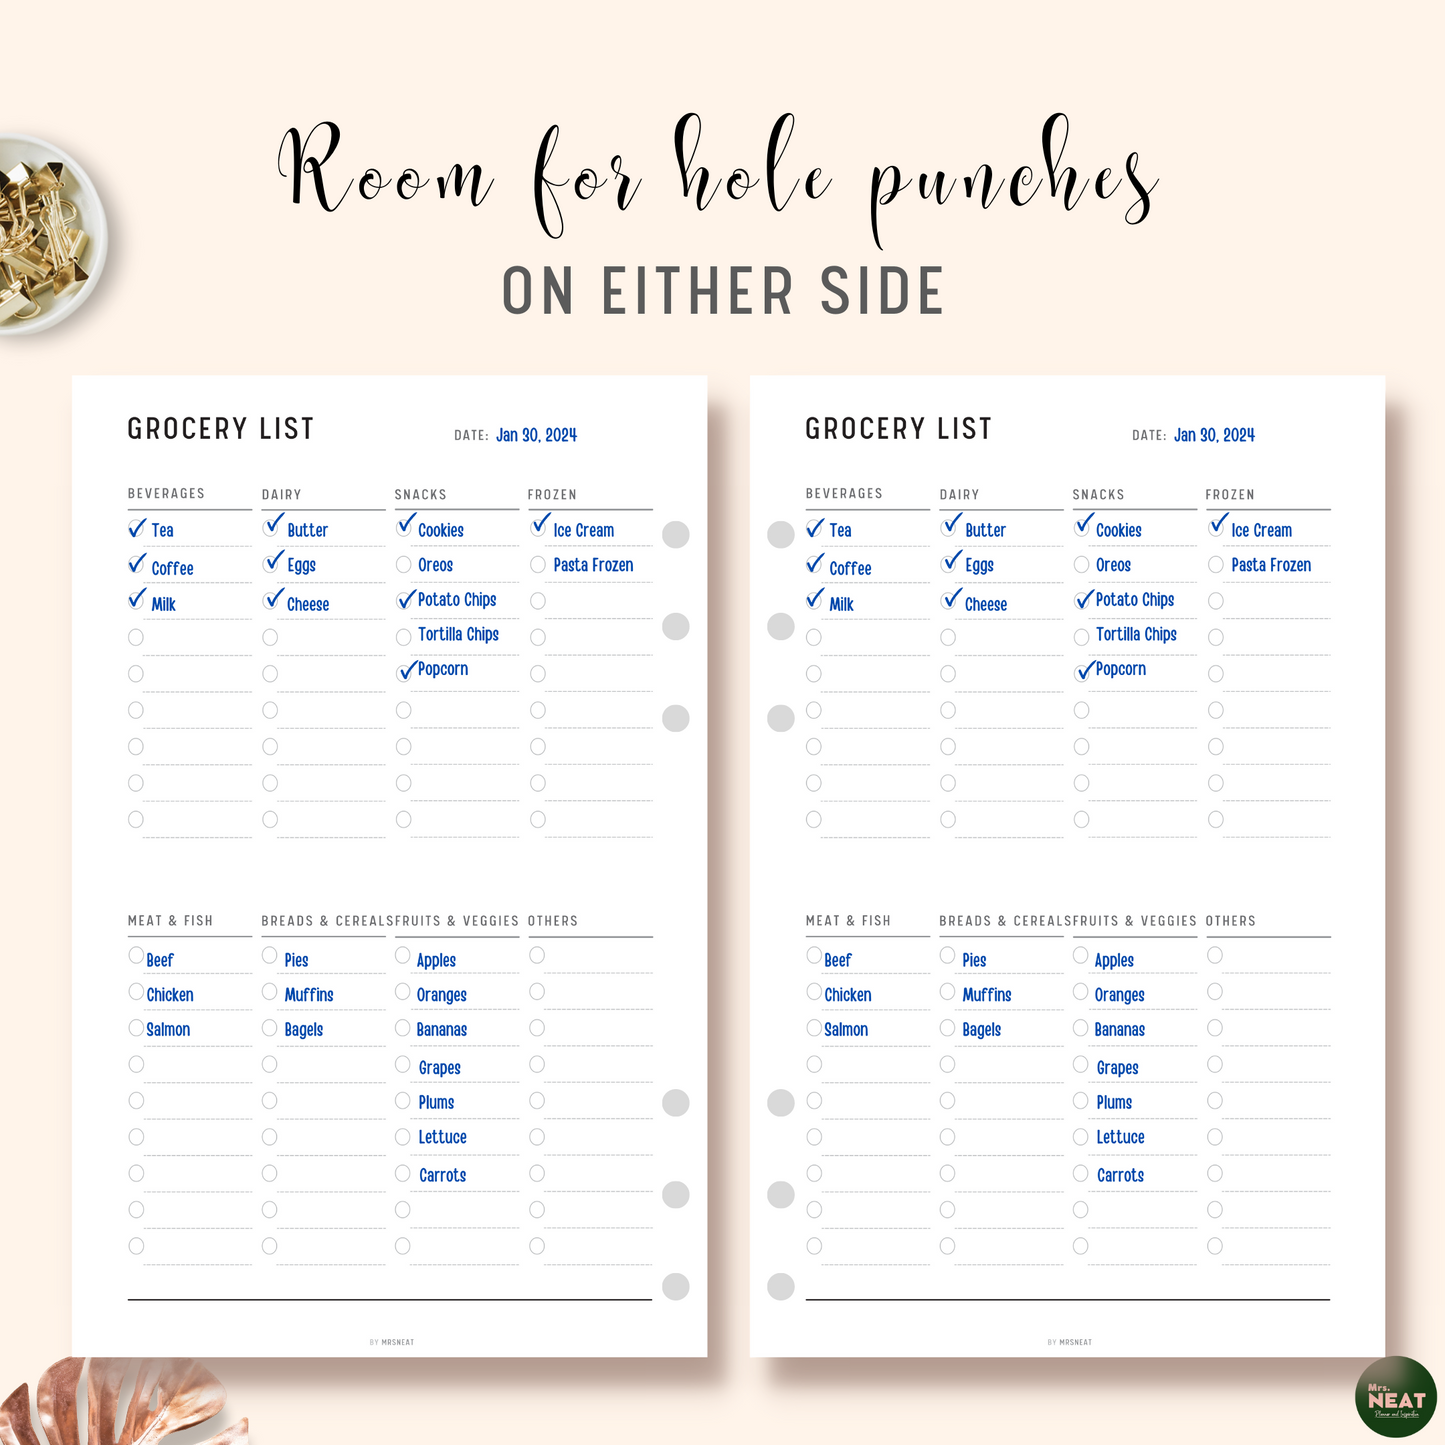 Minimalist Grocery List Planner with room for hole punches on either side